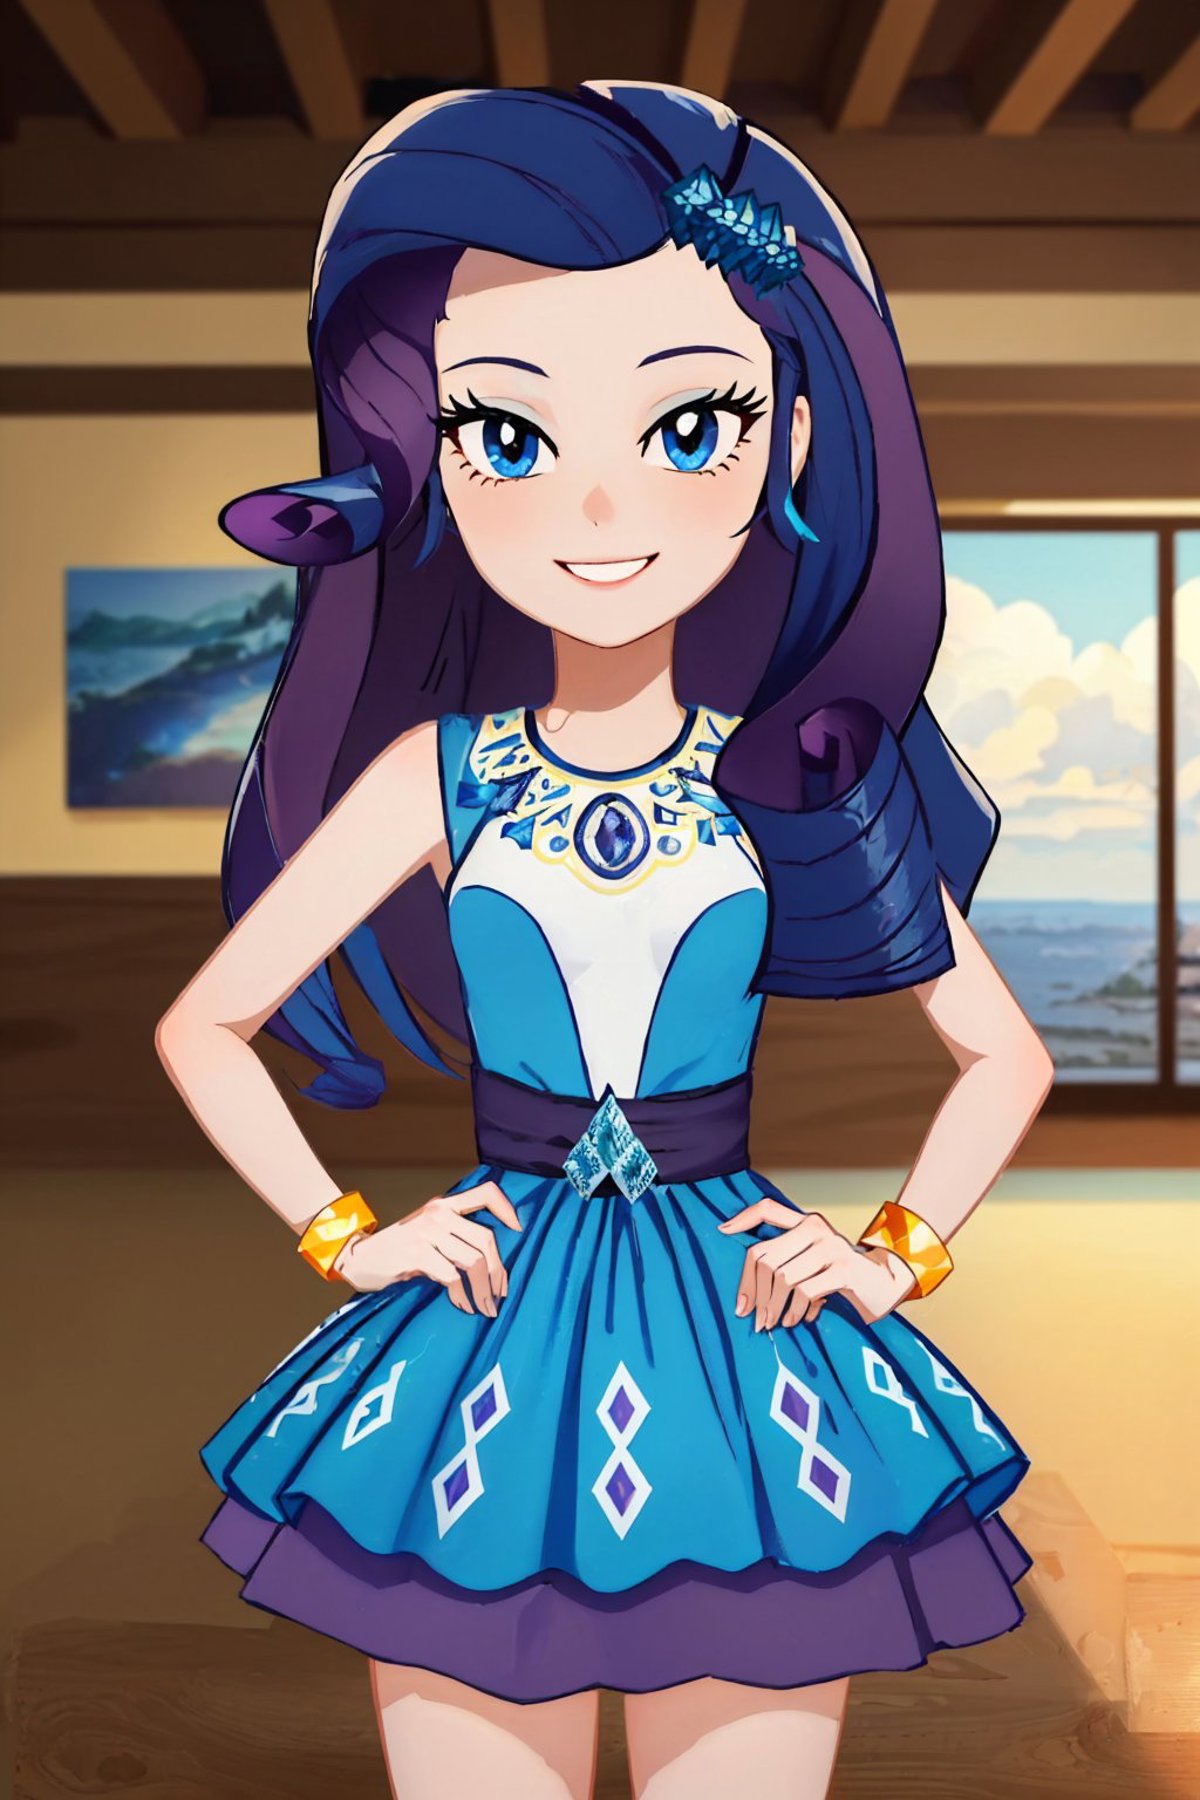 Rarity | My Little Pony / Equestria Girls image by justTNP